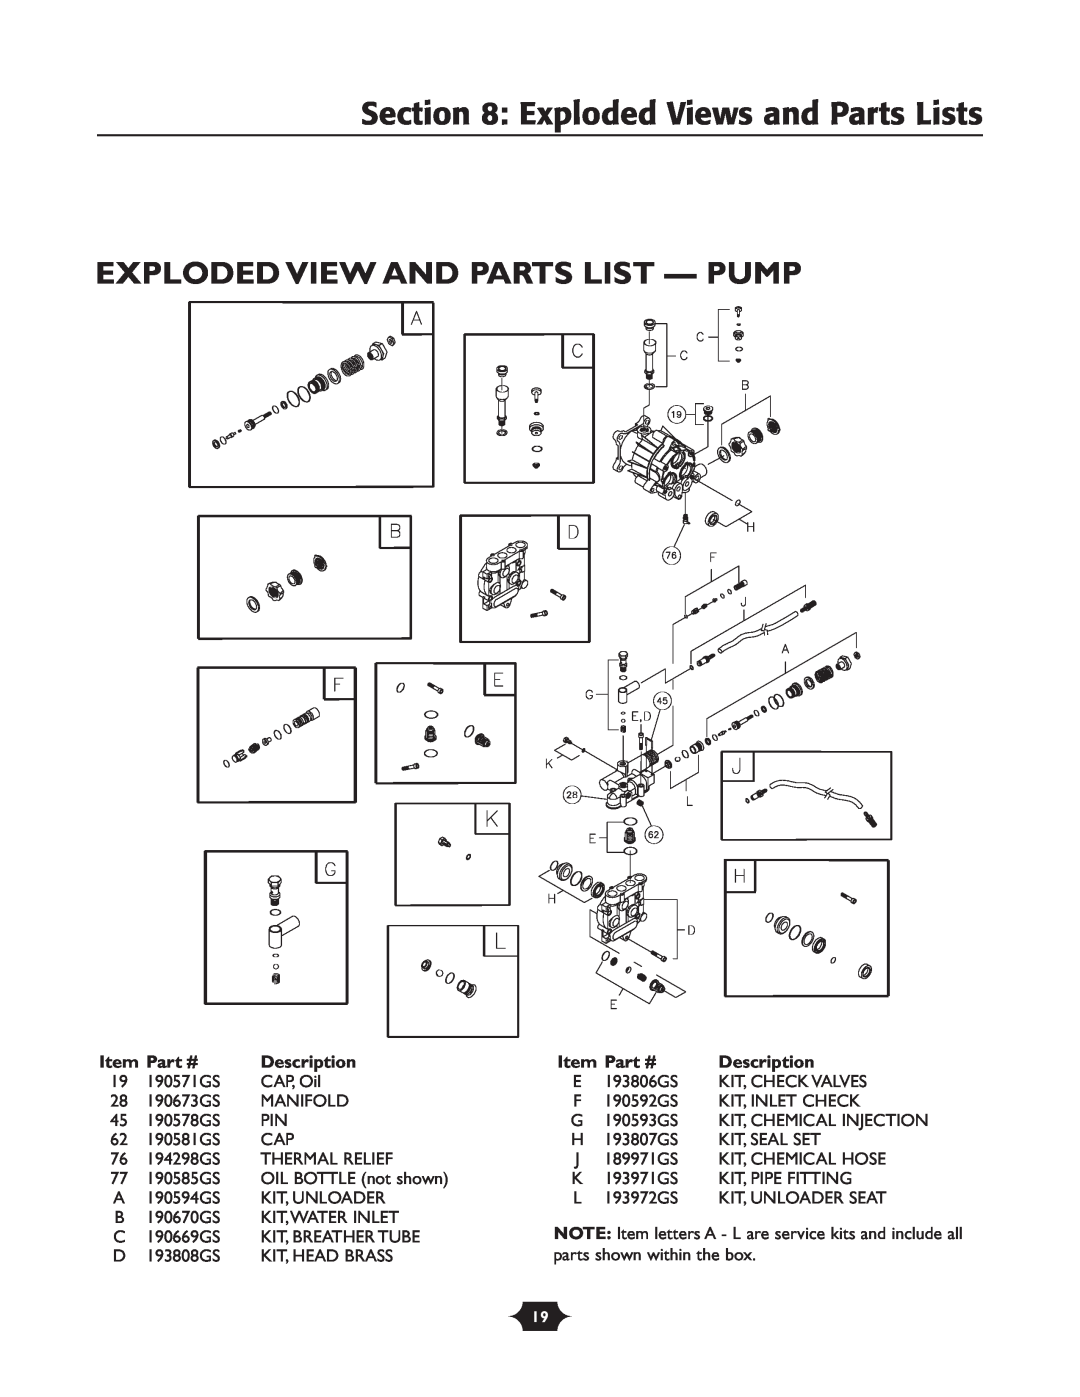 Briggs & Stratton 1903 Exploded Views and Parts Lists, Exploded View And Parts List — Pump, Item Part #, Description 